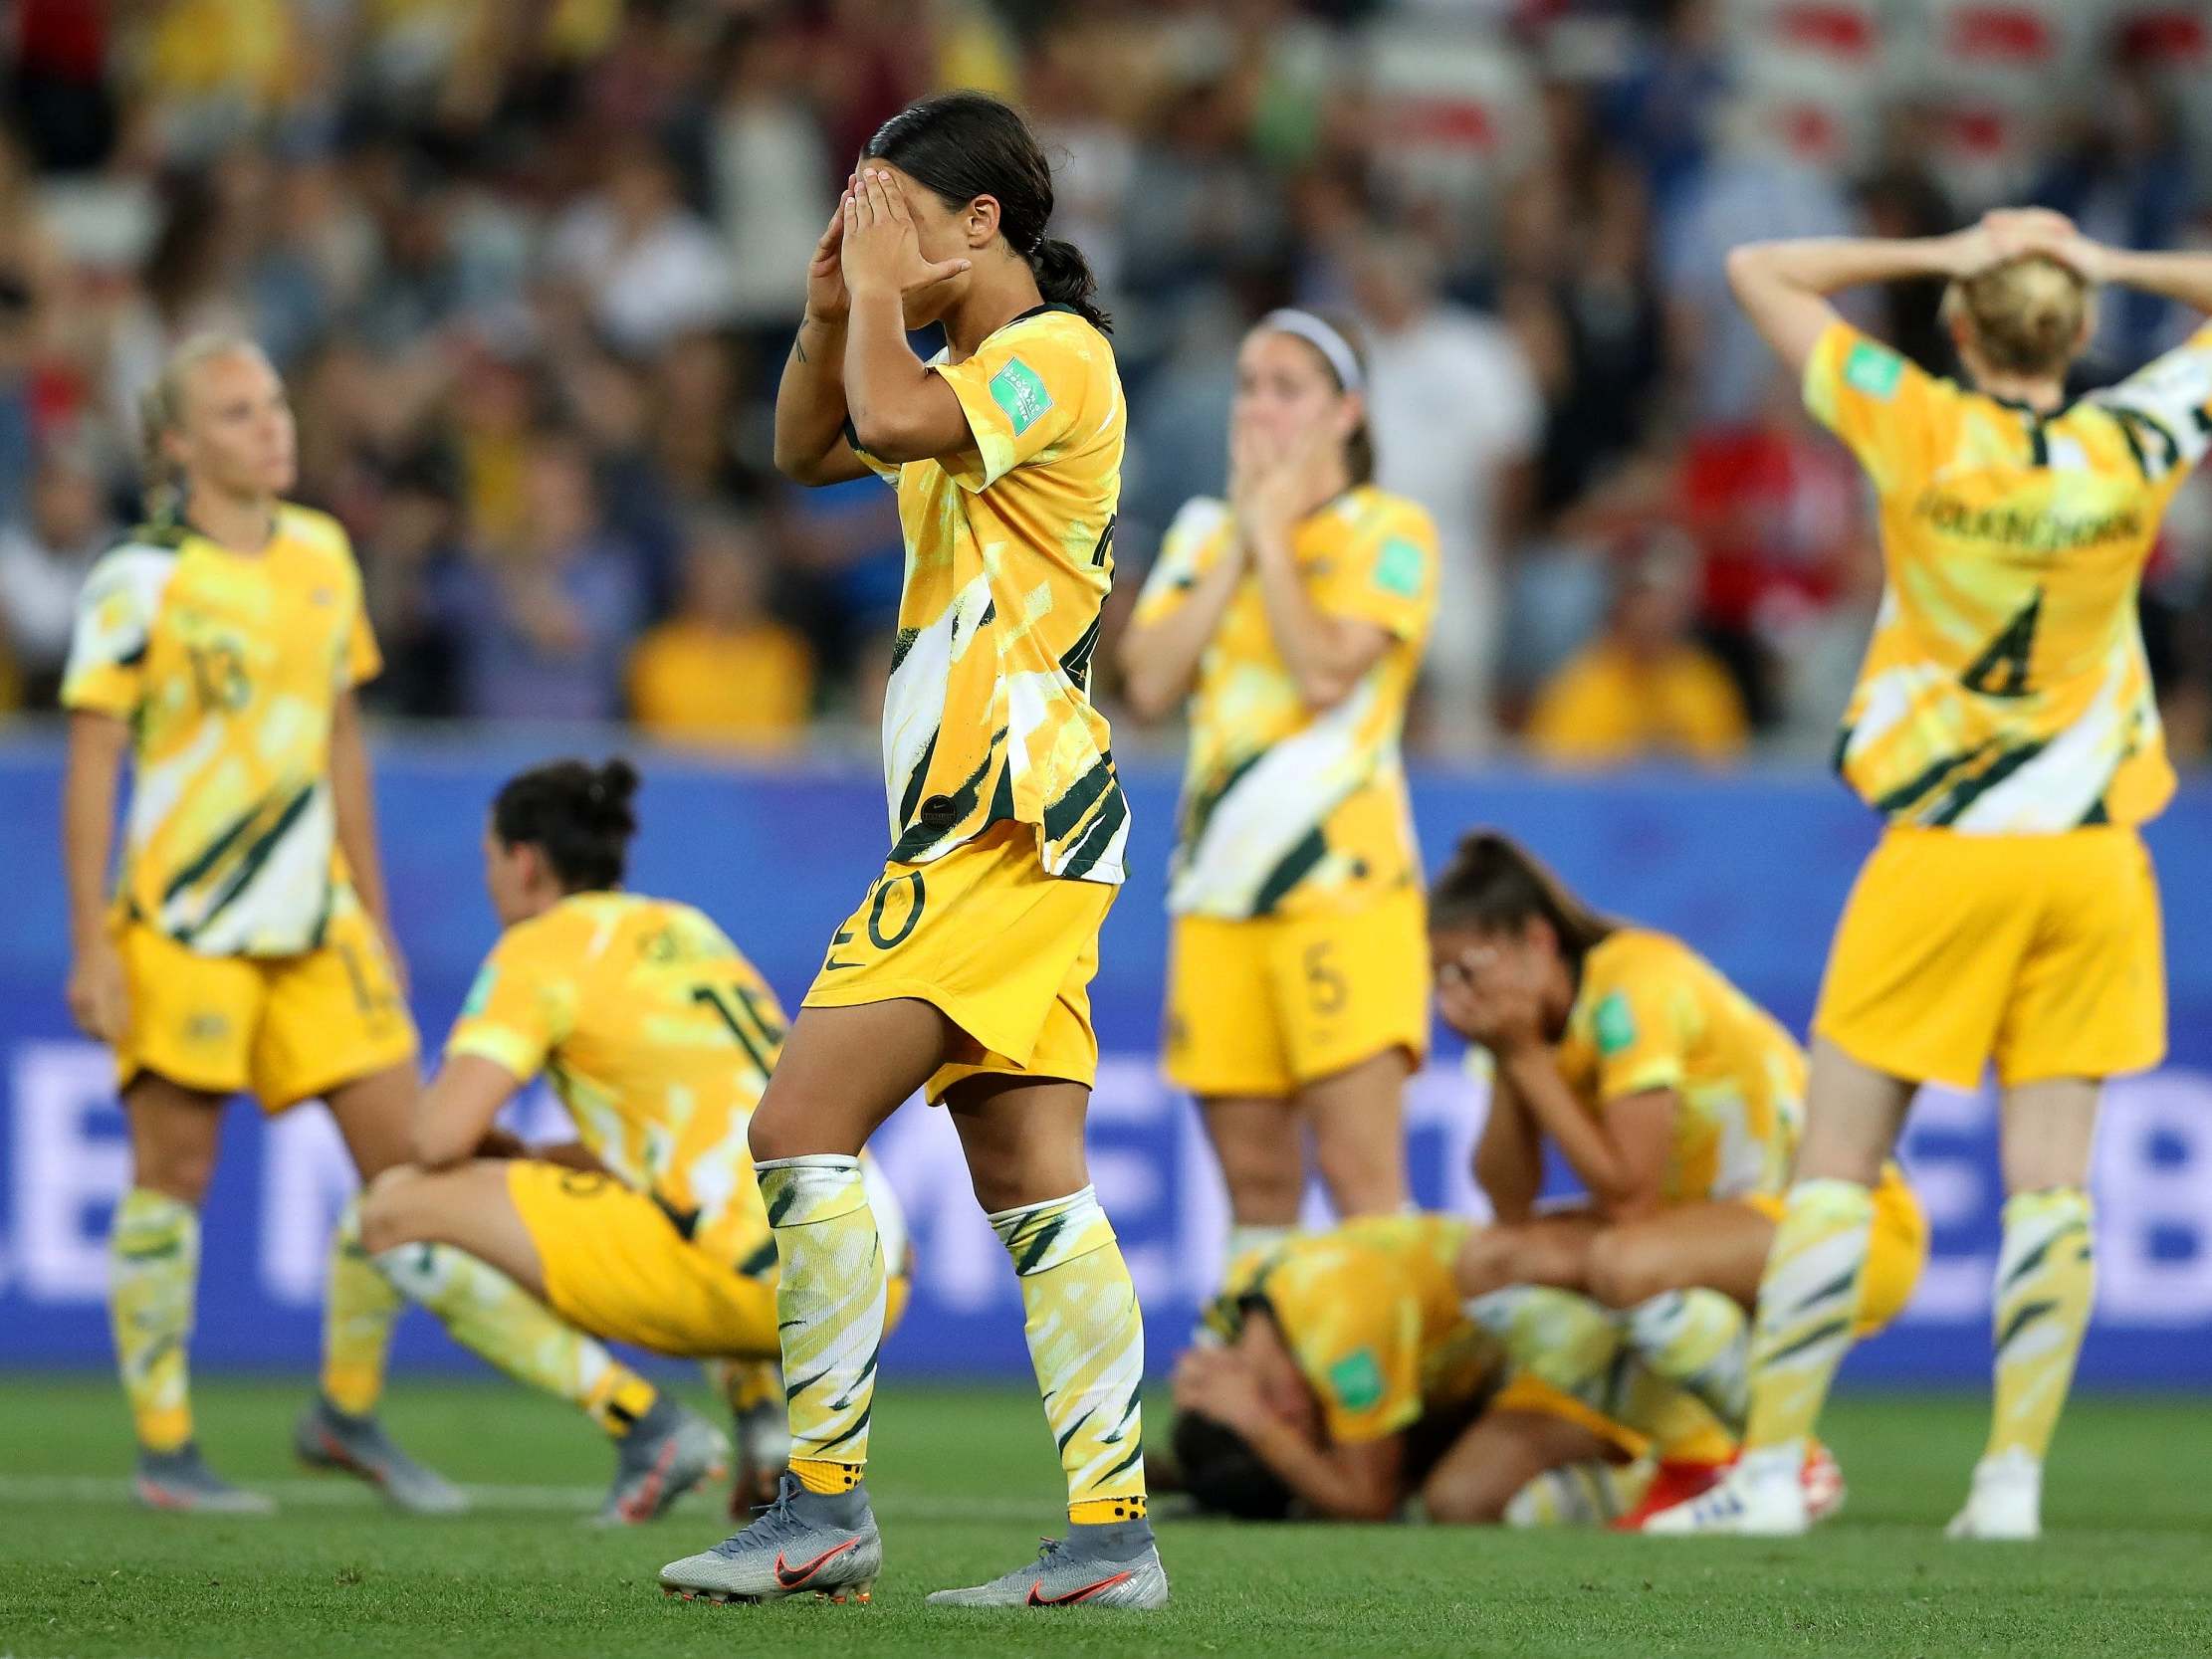 Australia were knocked out in the round of 16